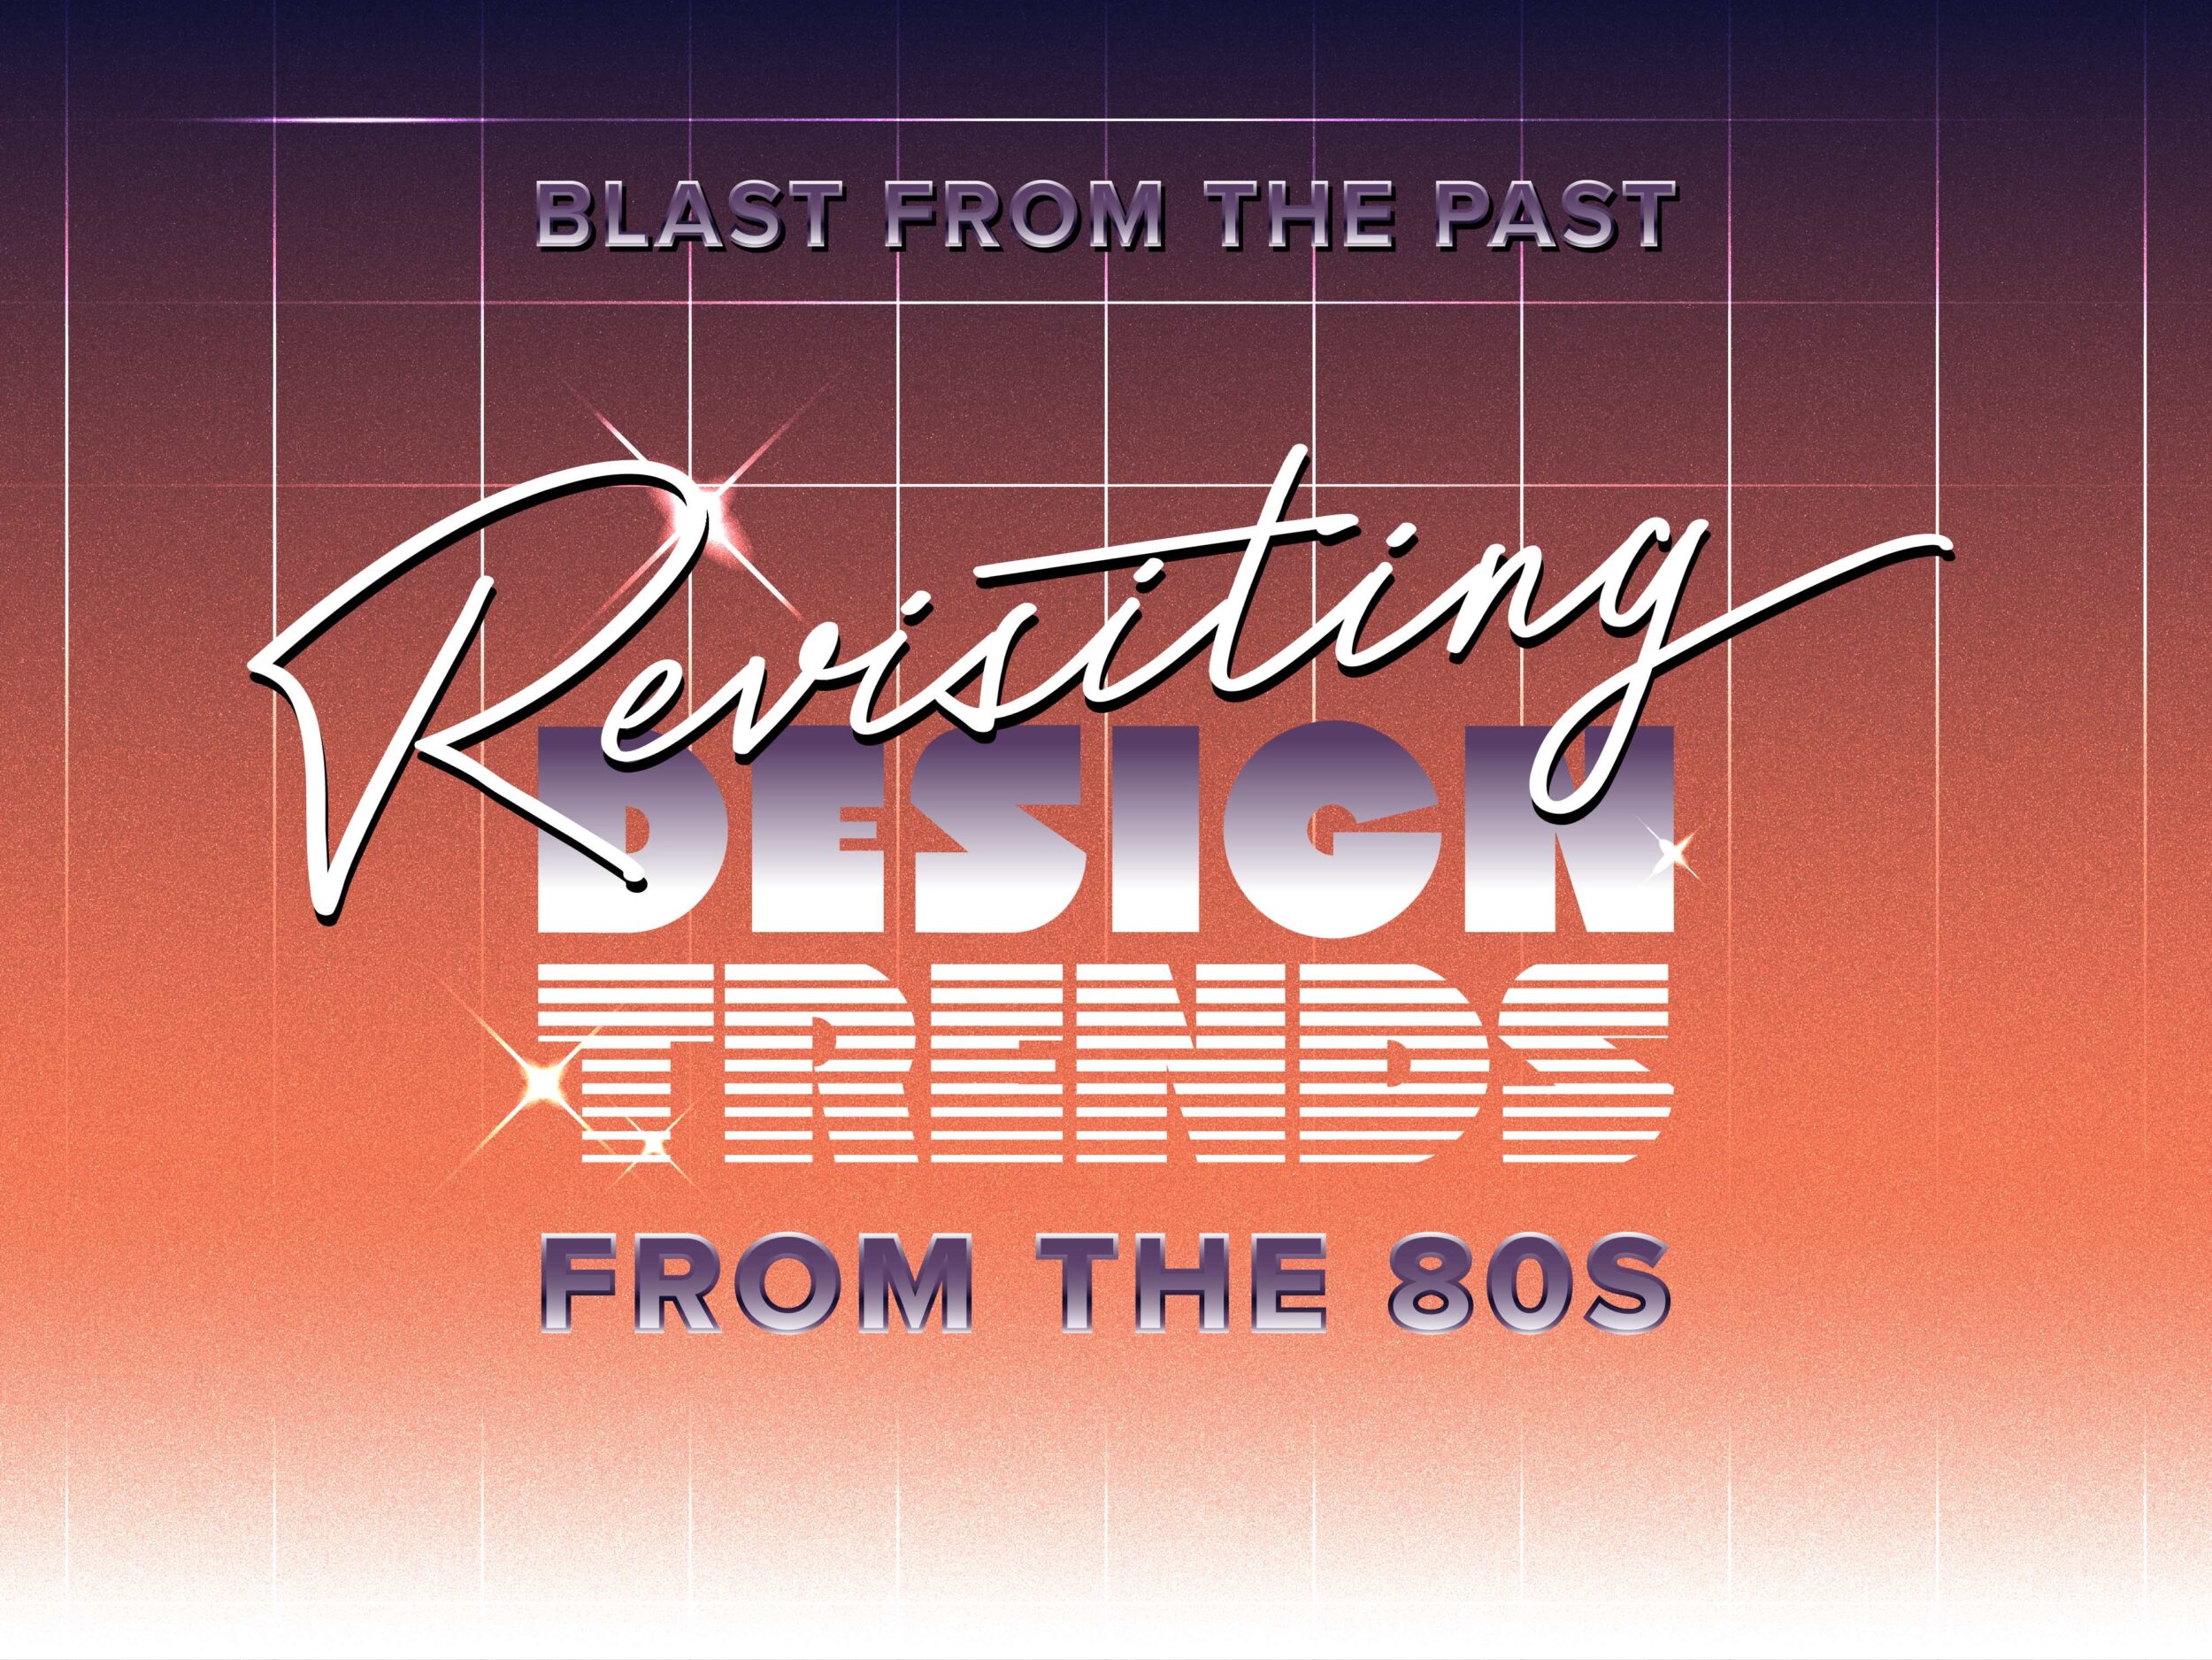 The 1980s: A Decade of Iconic, Eclectic and Retro Design Trends